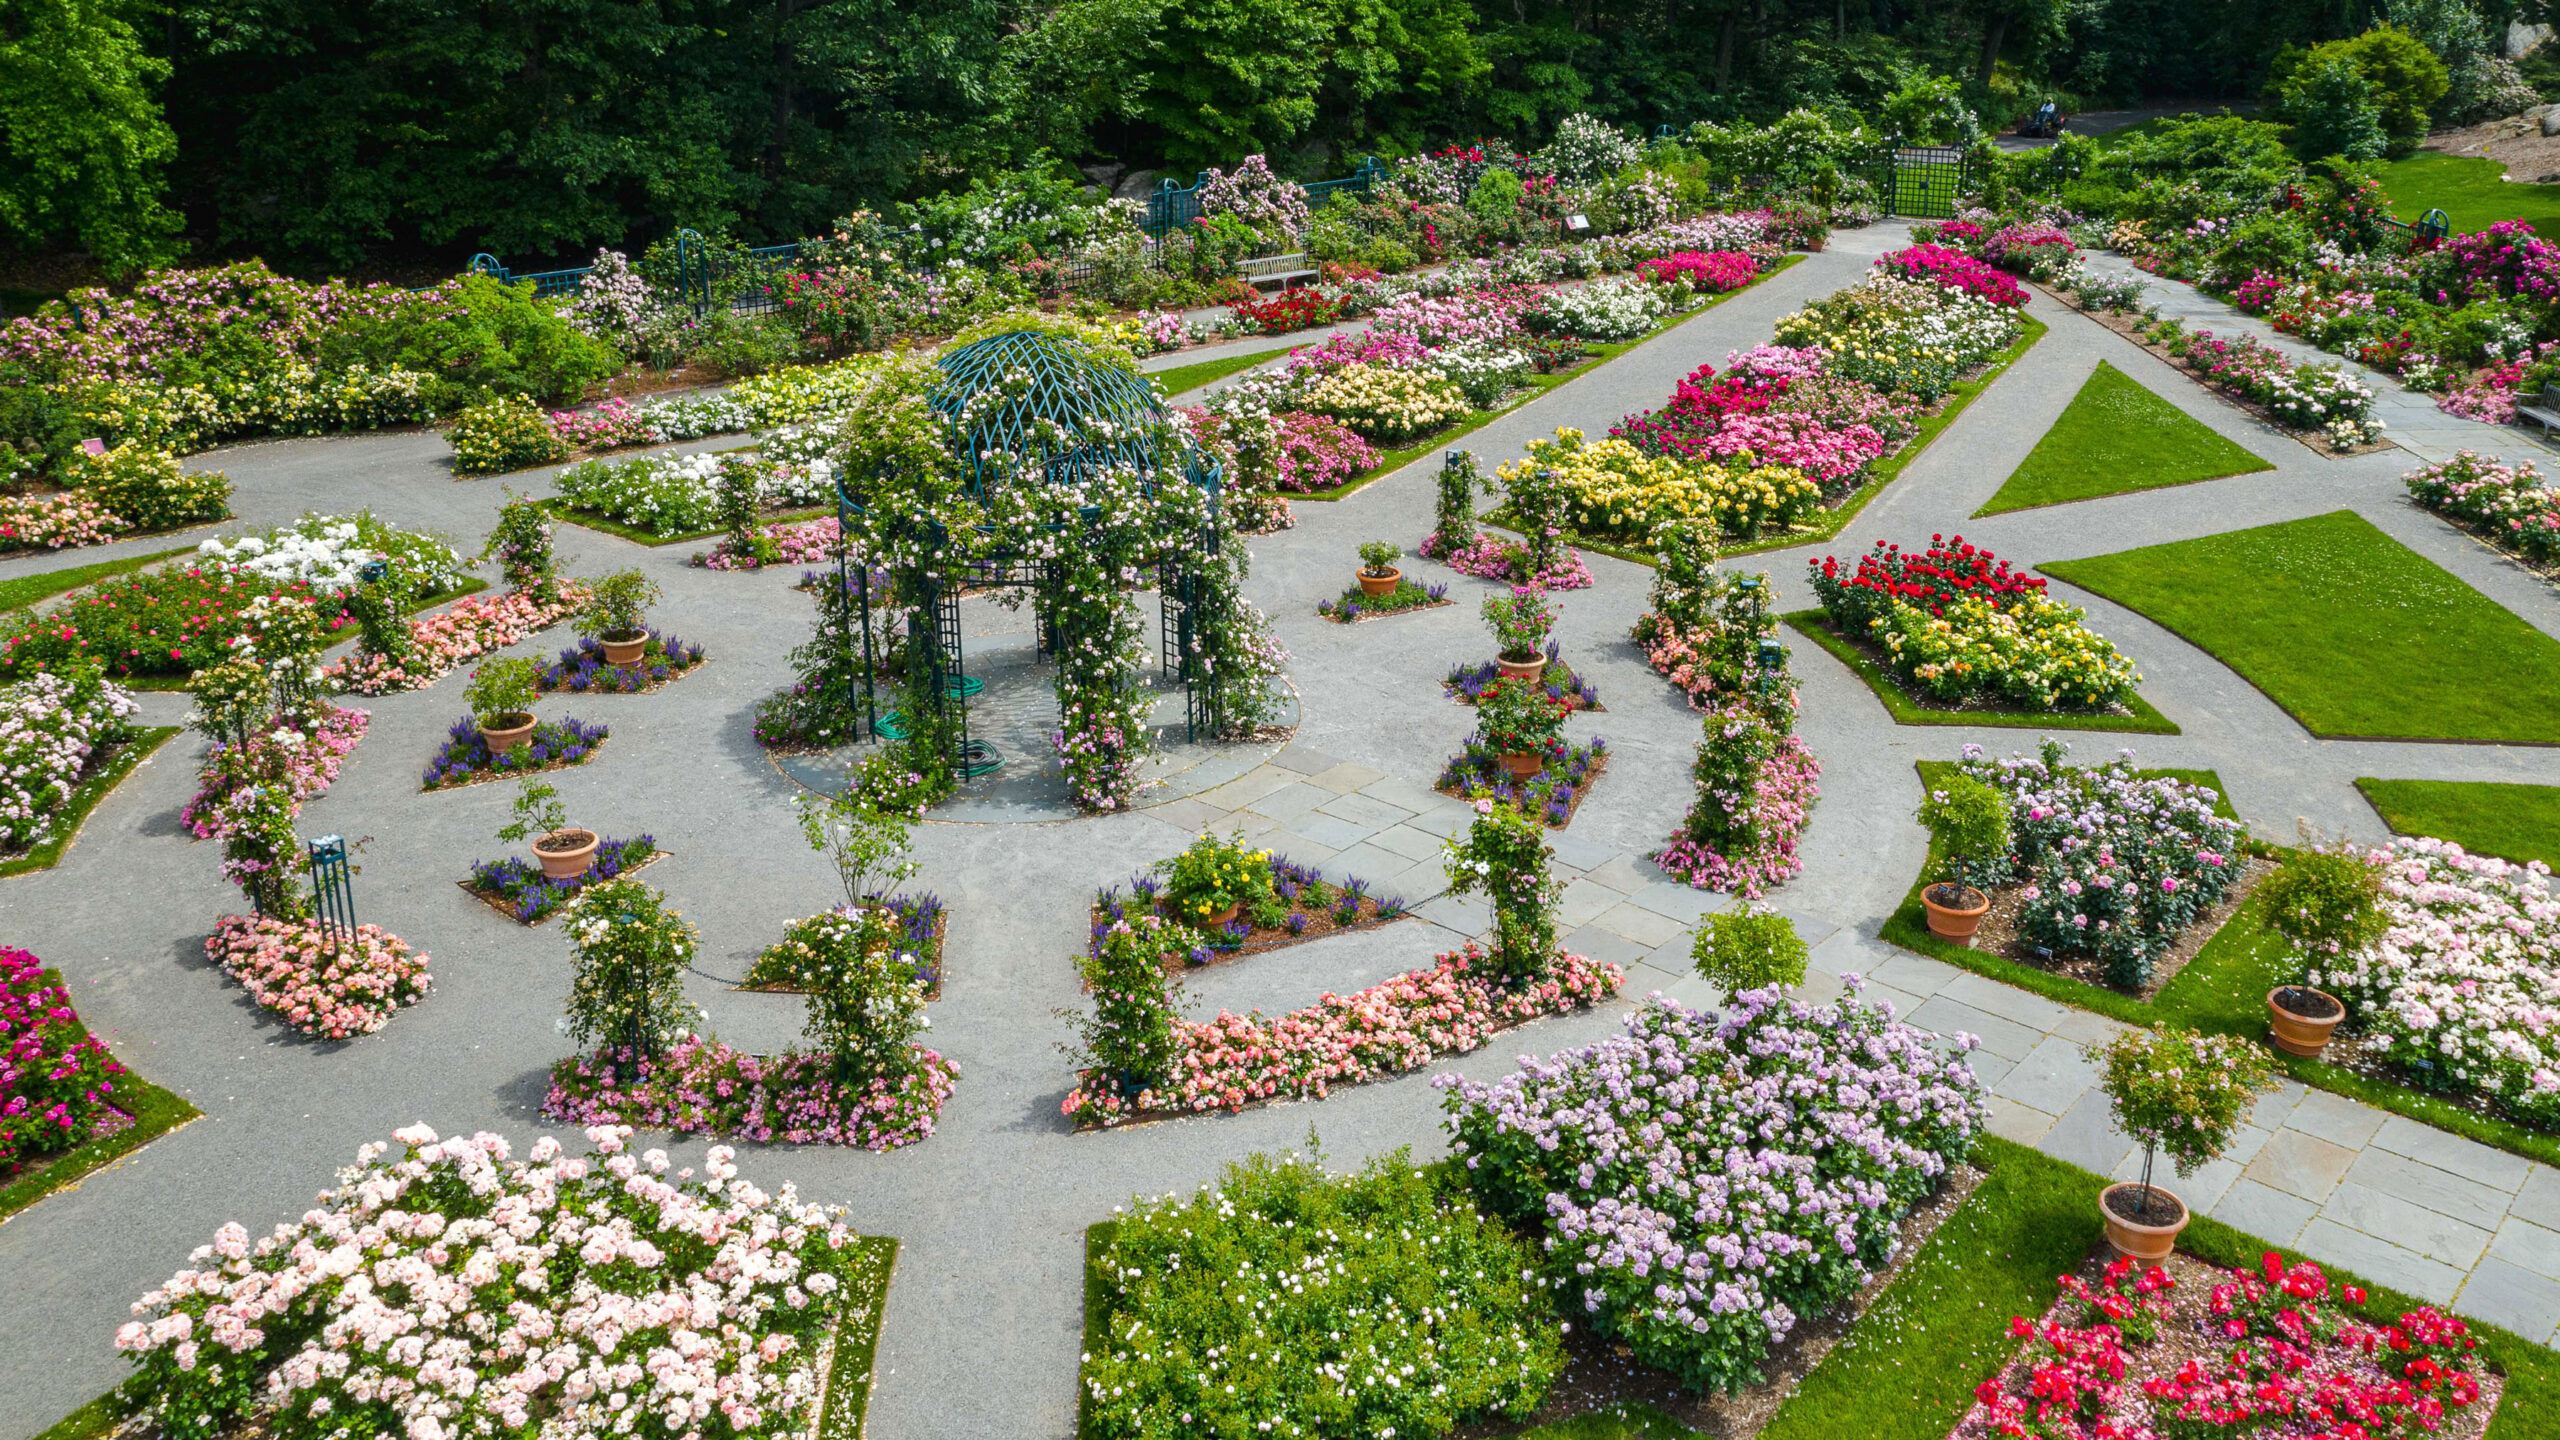 An overhead view of a vibrantly colored rose garden centered around a vine-covered pergola, with white, red, purple, pink, and yellow blooms visible among green foliage